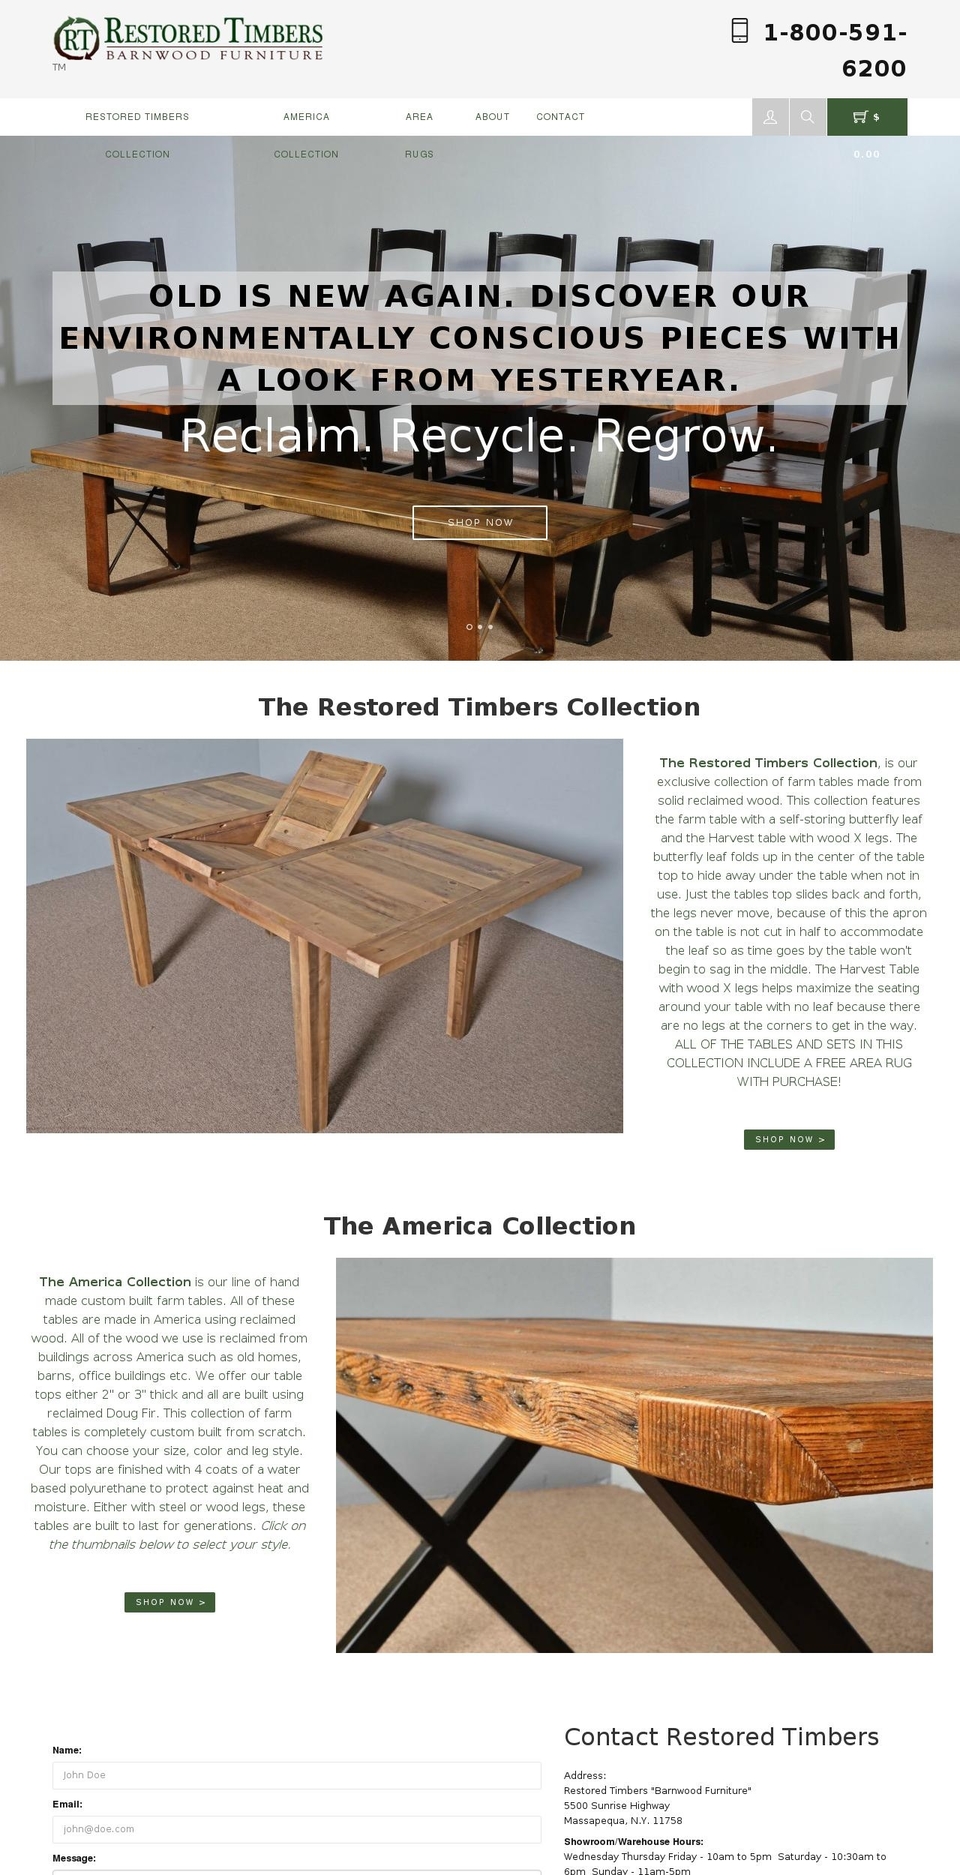 Minion Shopify theme site example furniturewithahistory.com